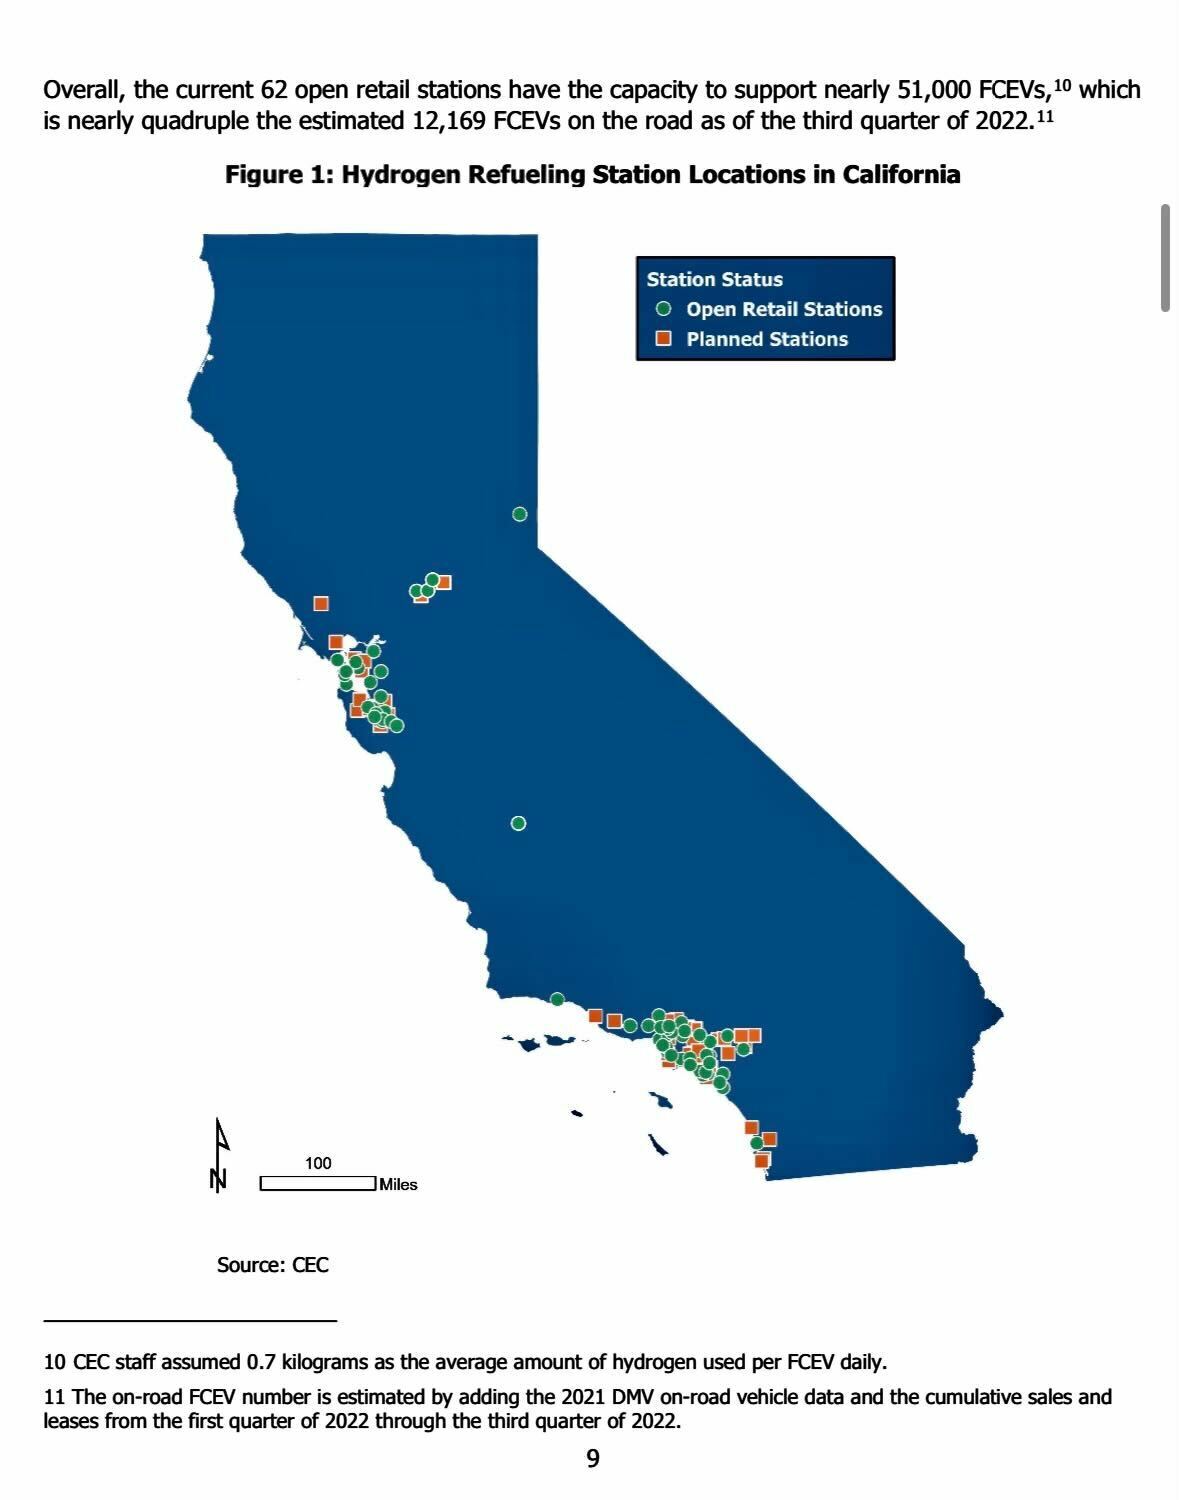 Hydrogen Refueling Station Locations in California